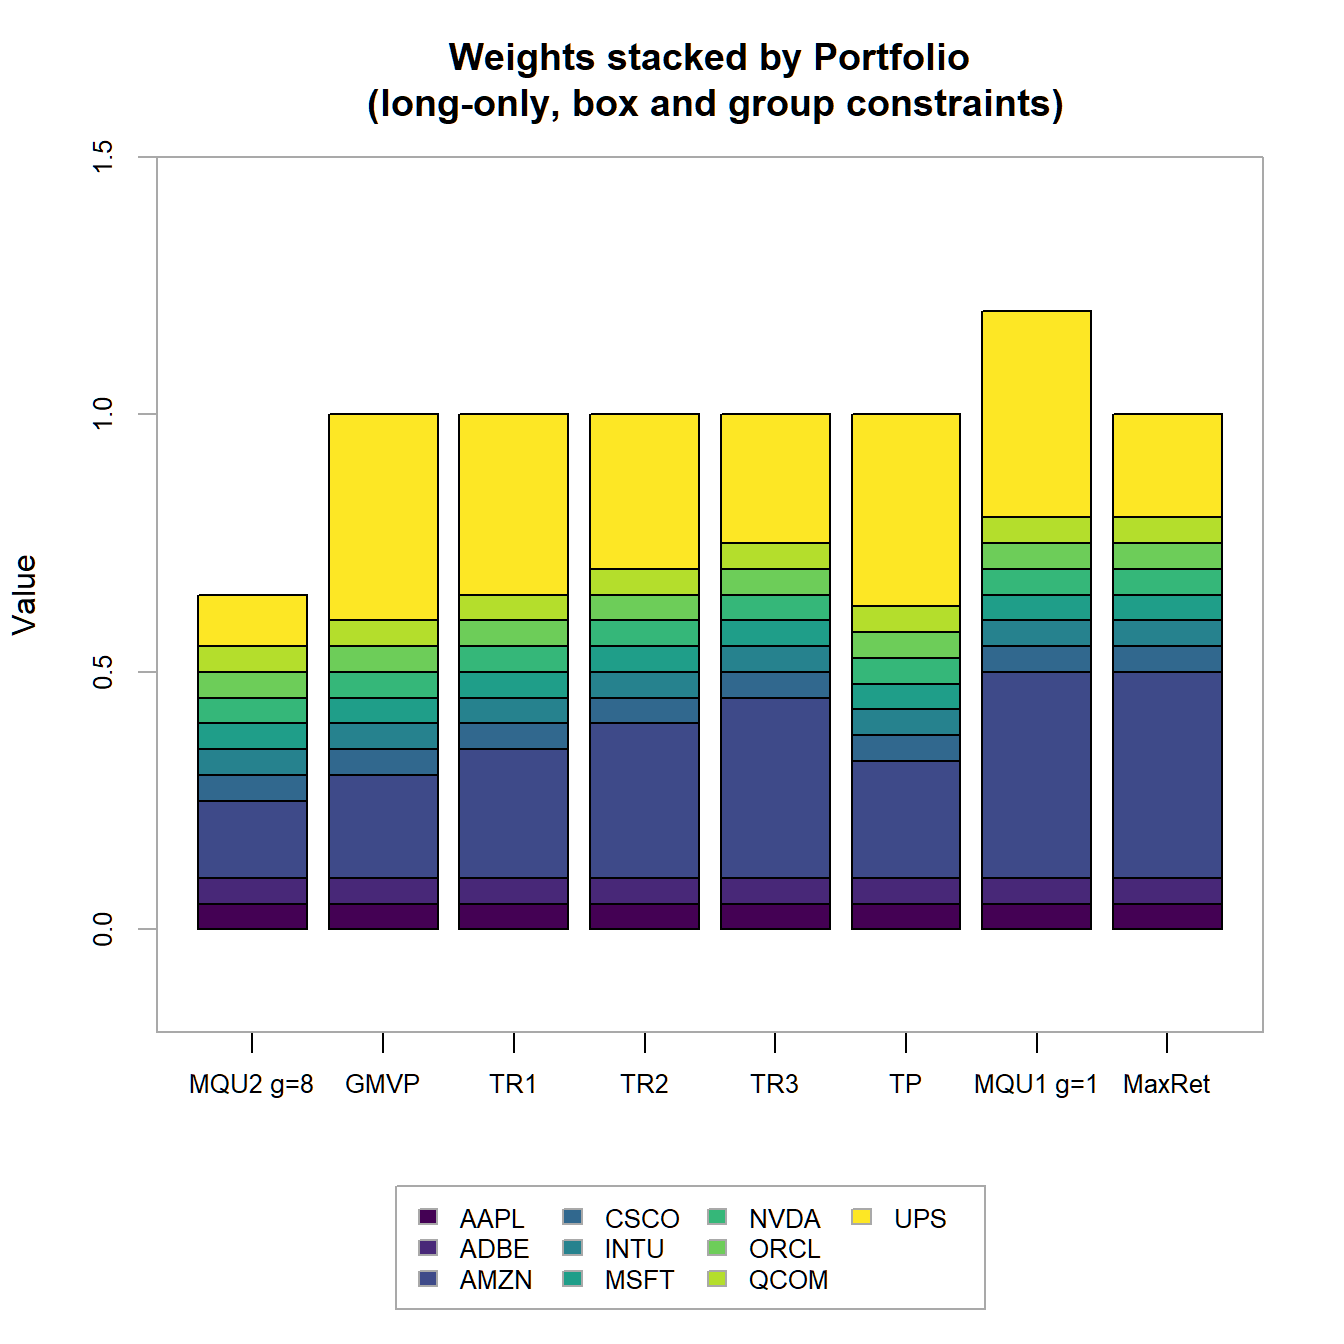 Portfolio weights stacked by portfolio for all optimized long-only portfolios with box and group constraints.